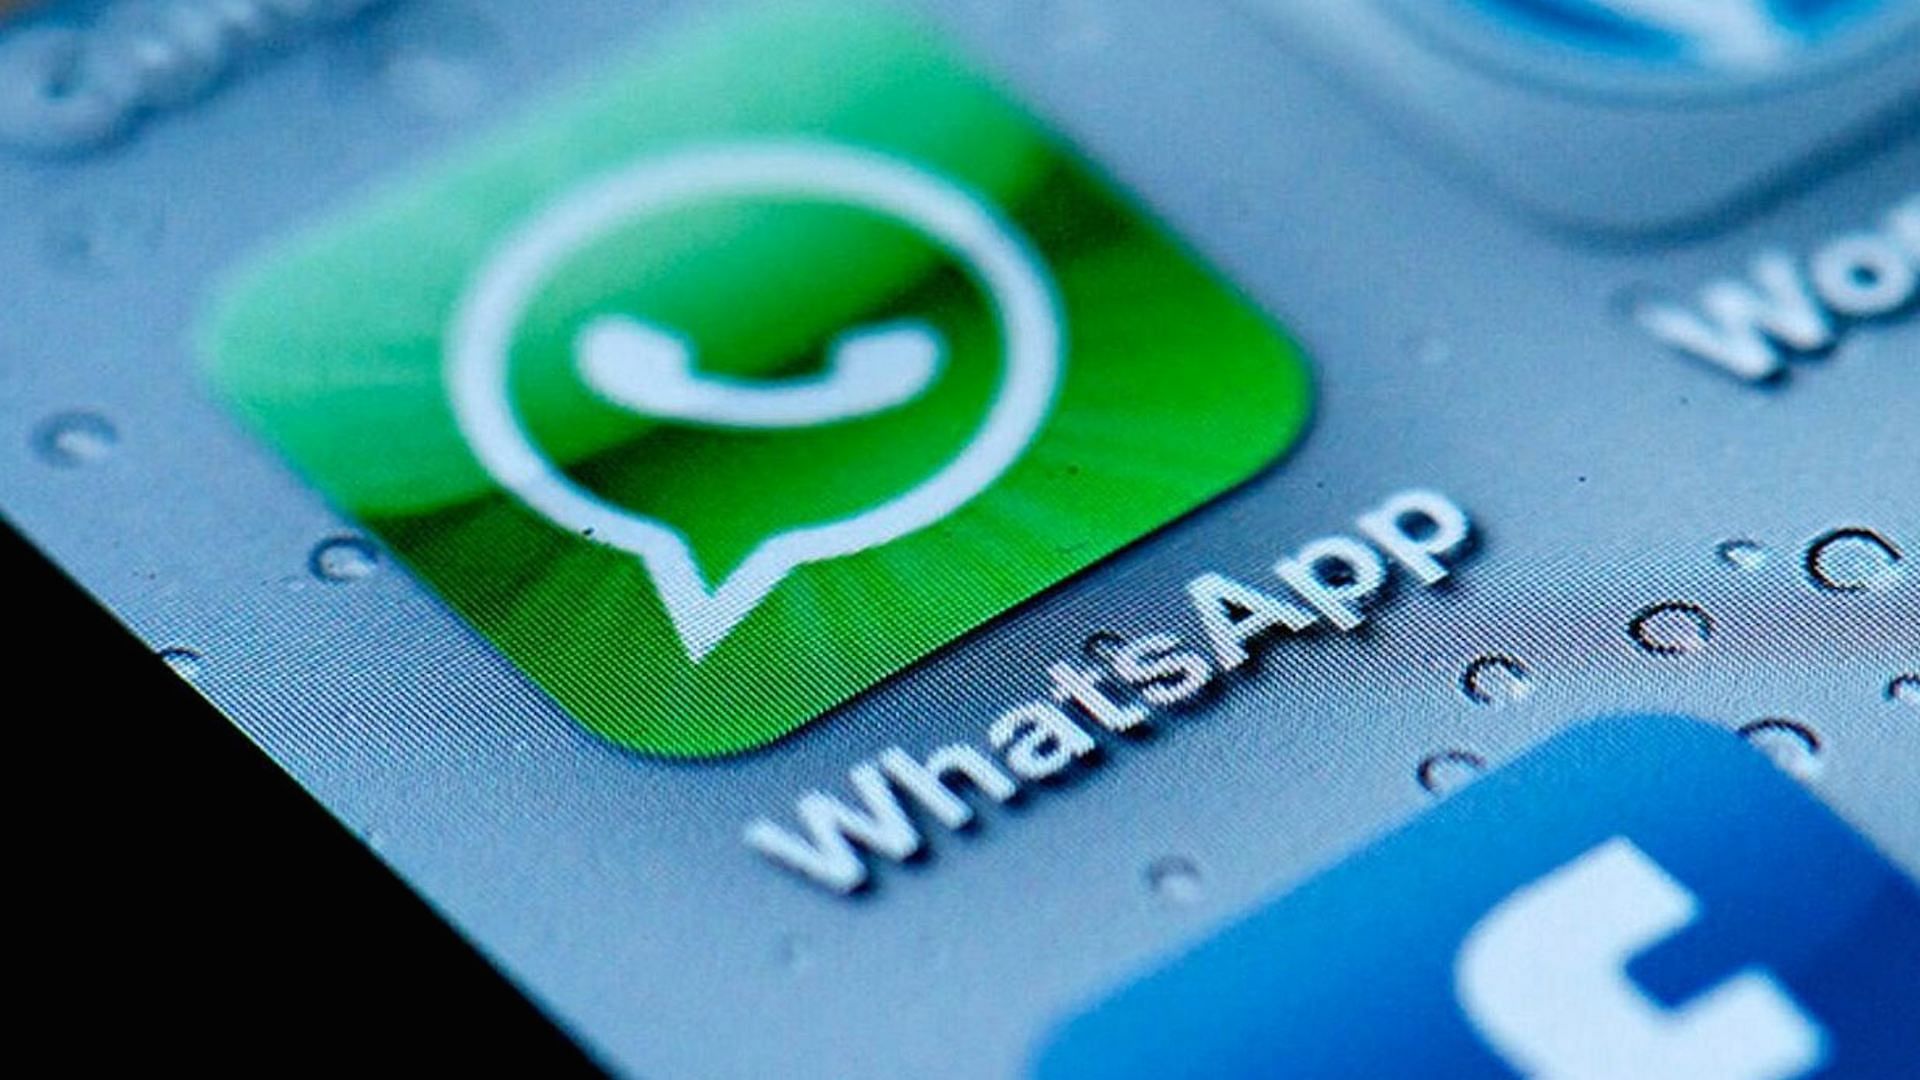 WhatsApp might let you unsend a message within 5 minutes. (Photo: iStock)